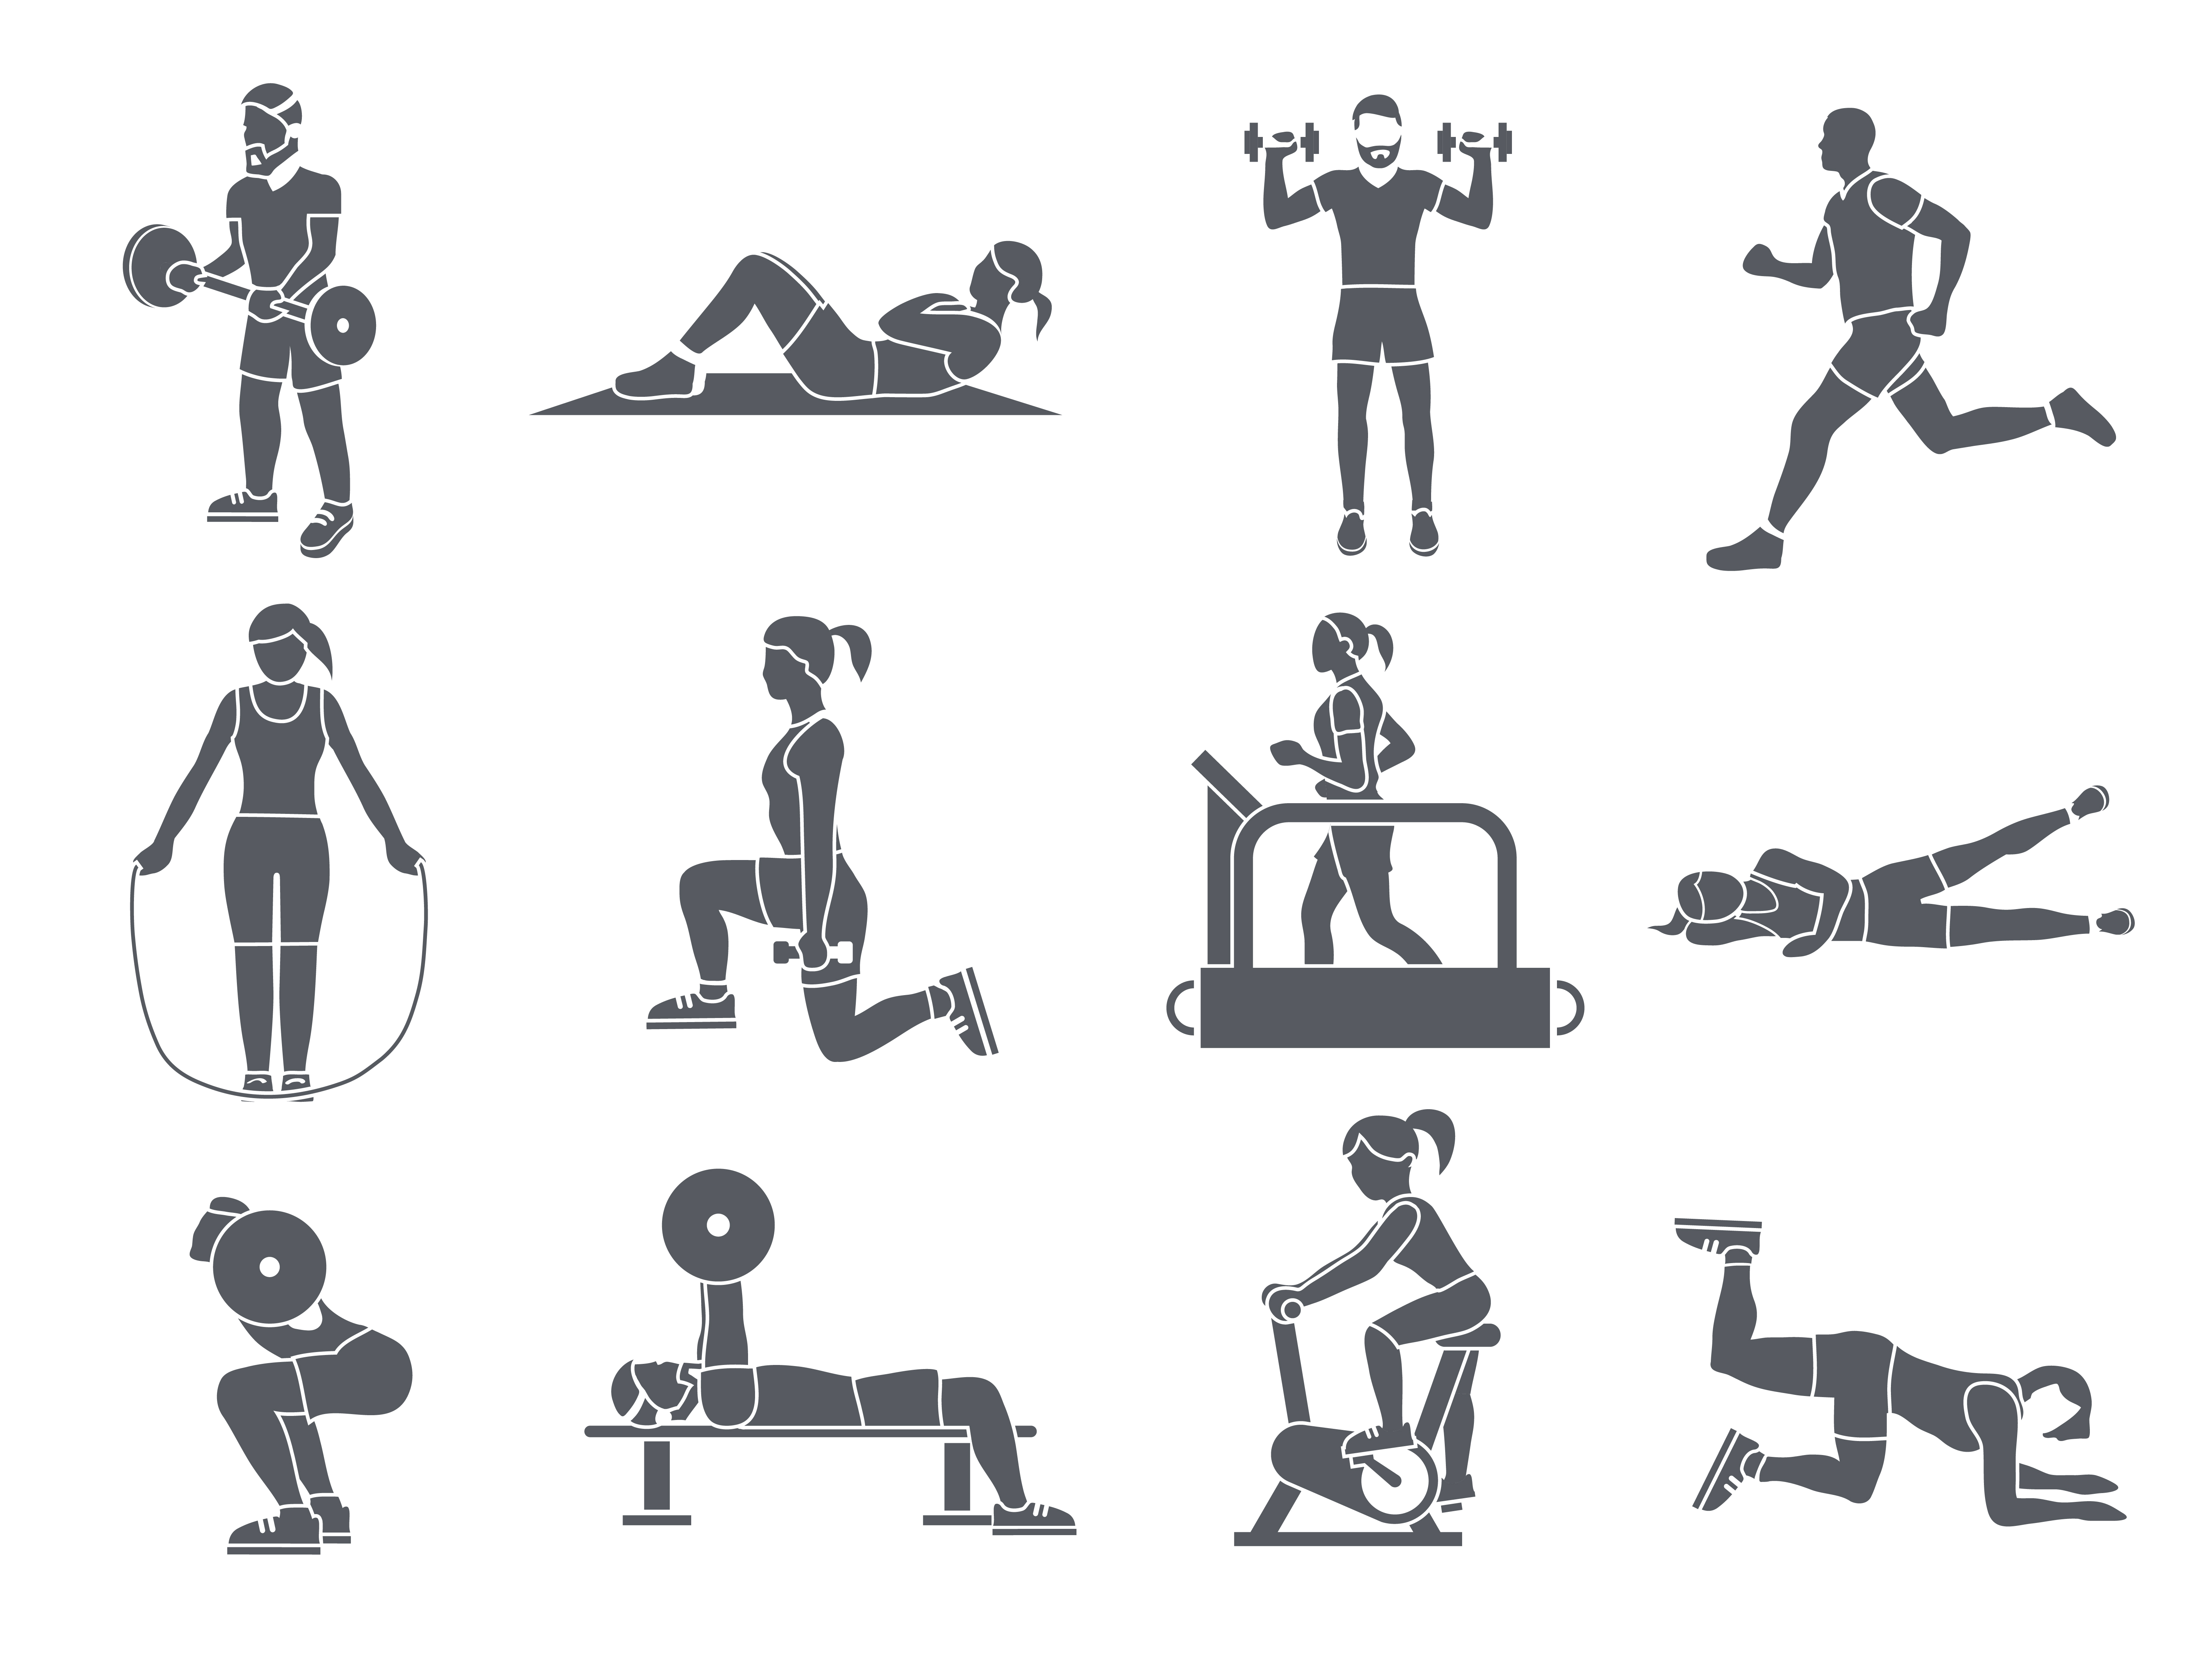 5 Day Gym Workout Symbols for Women